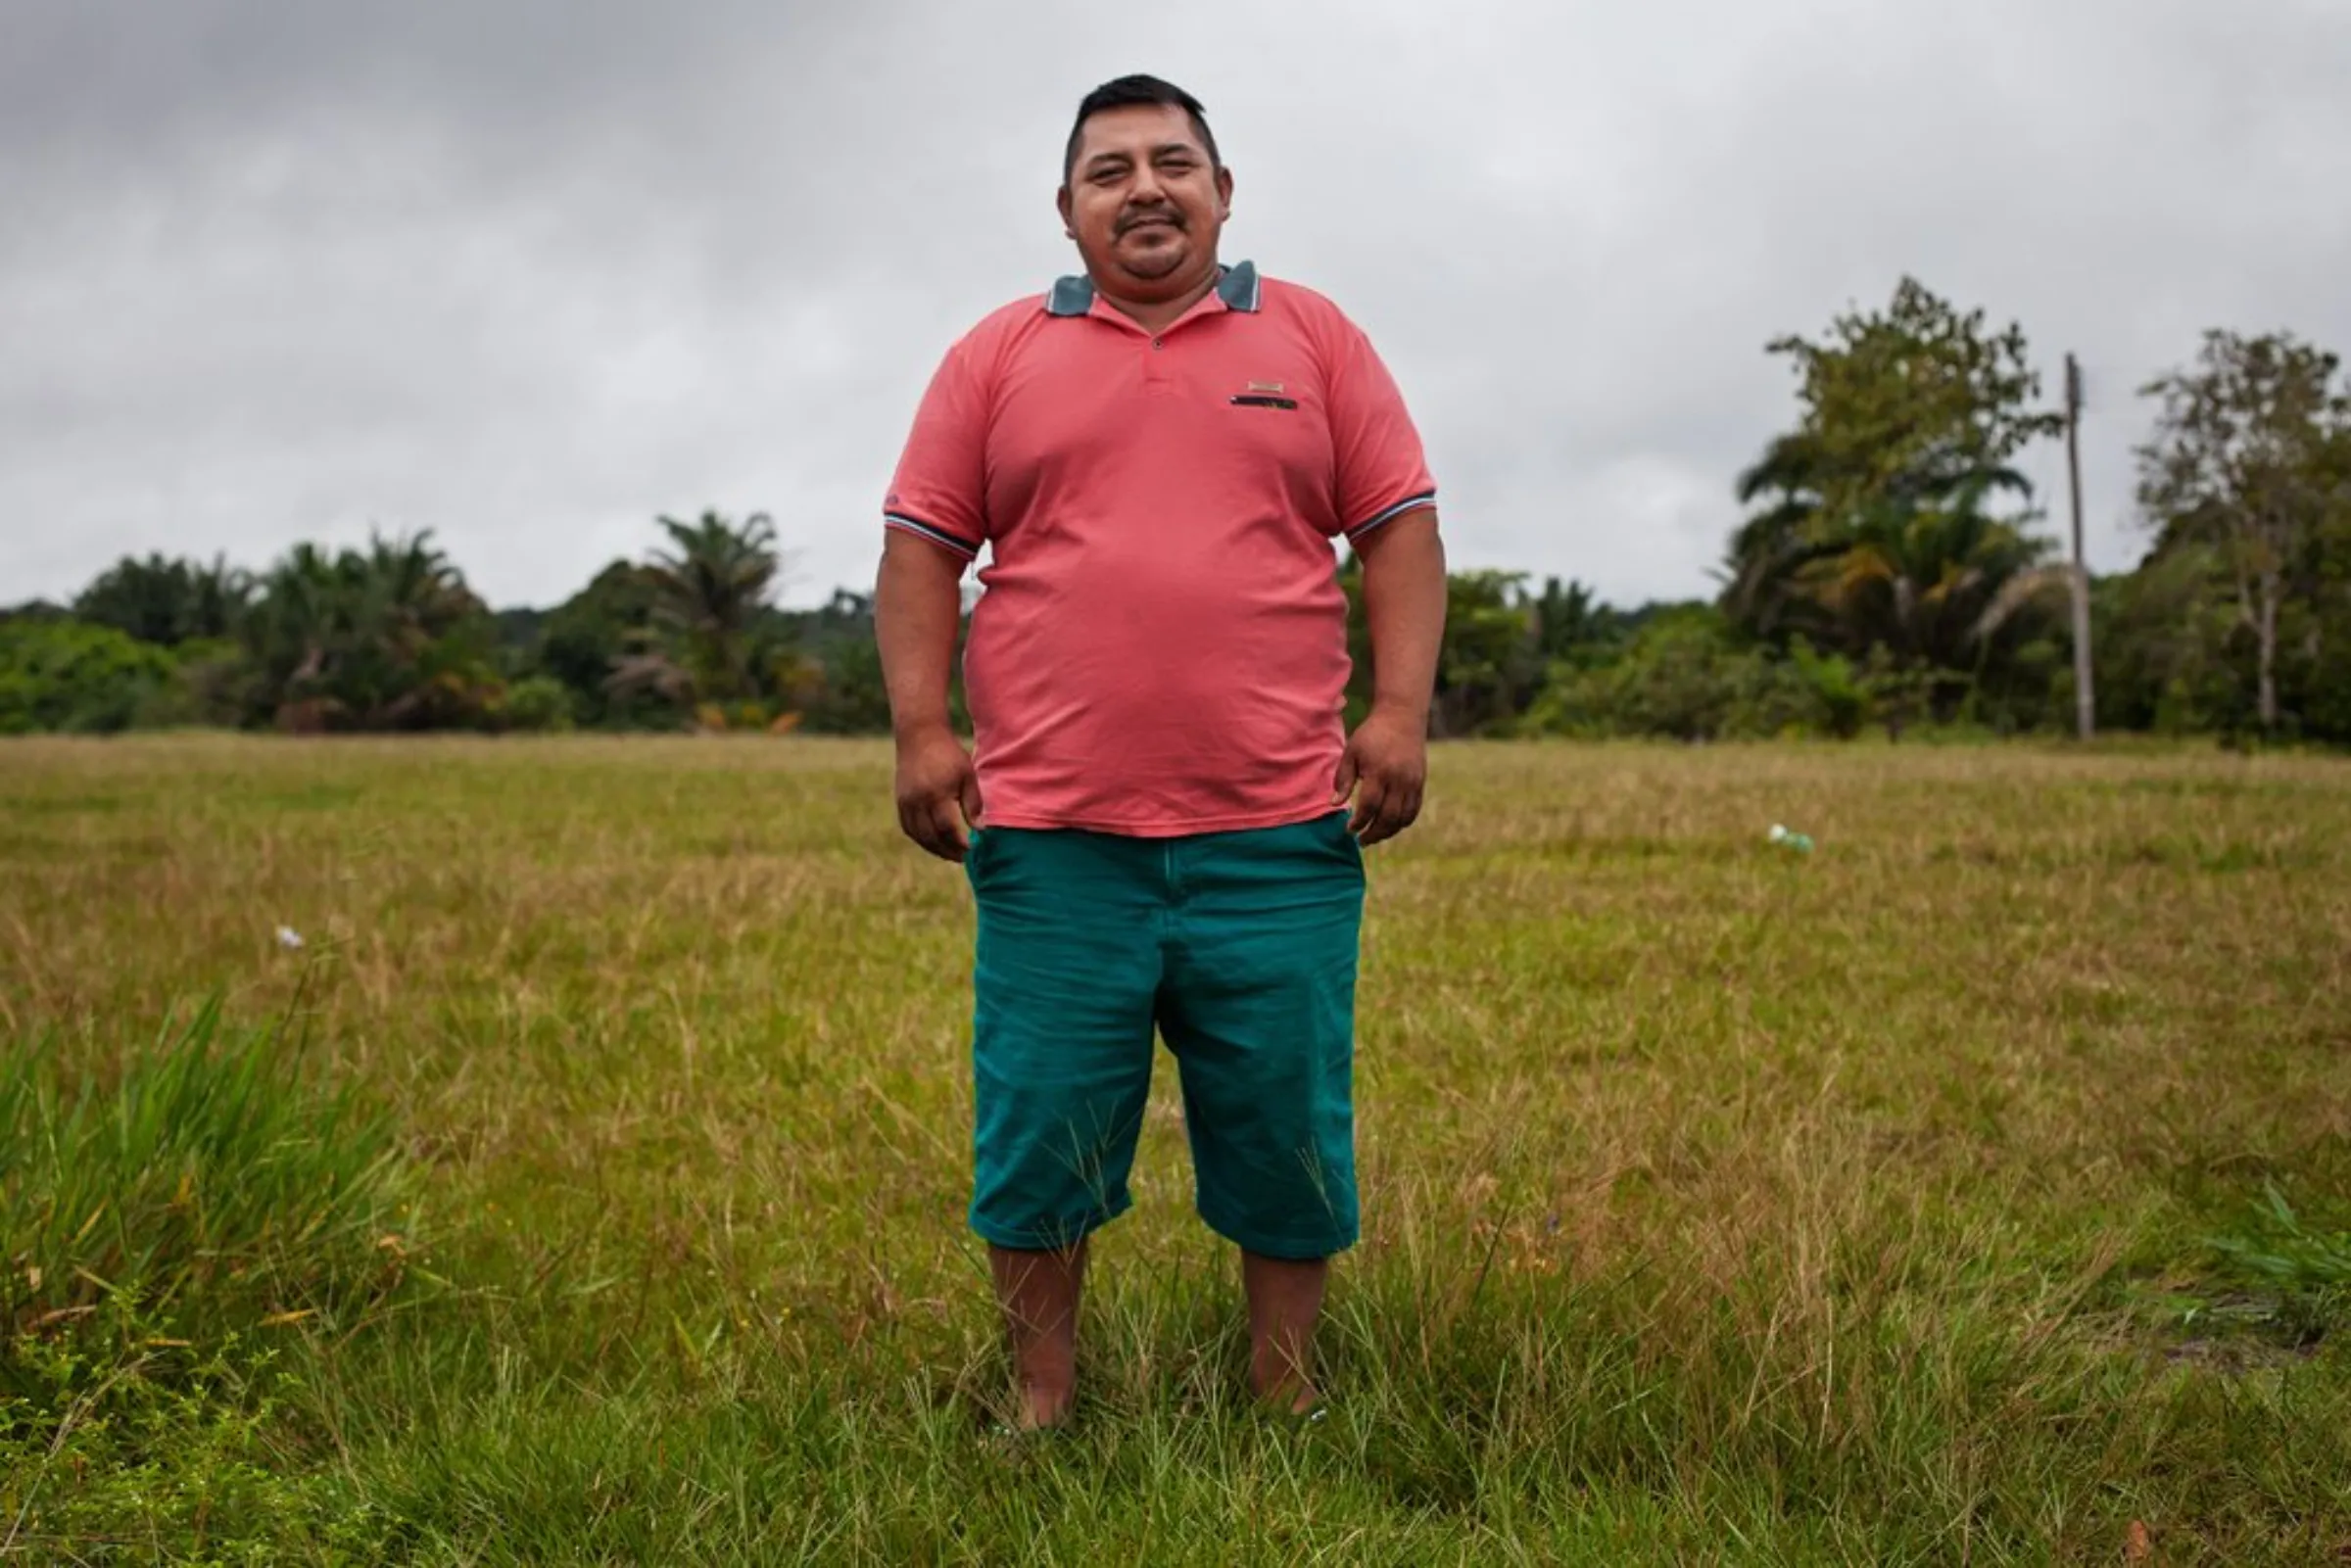 Indigenous leader Antonio Matapi, of the Matapi ethnic group, is part of a 10-member indigenous committee putting together the paperwork needed for them to become an ‘indigenous territorial entity,’ in Colombia’s southeast Amazonas province, December 16, 2021